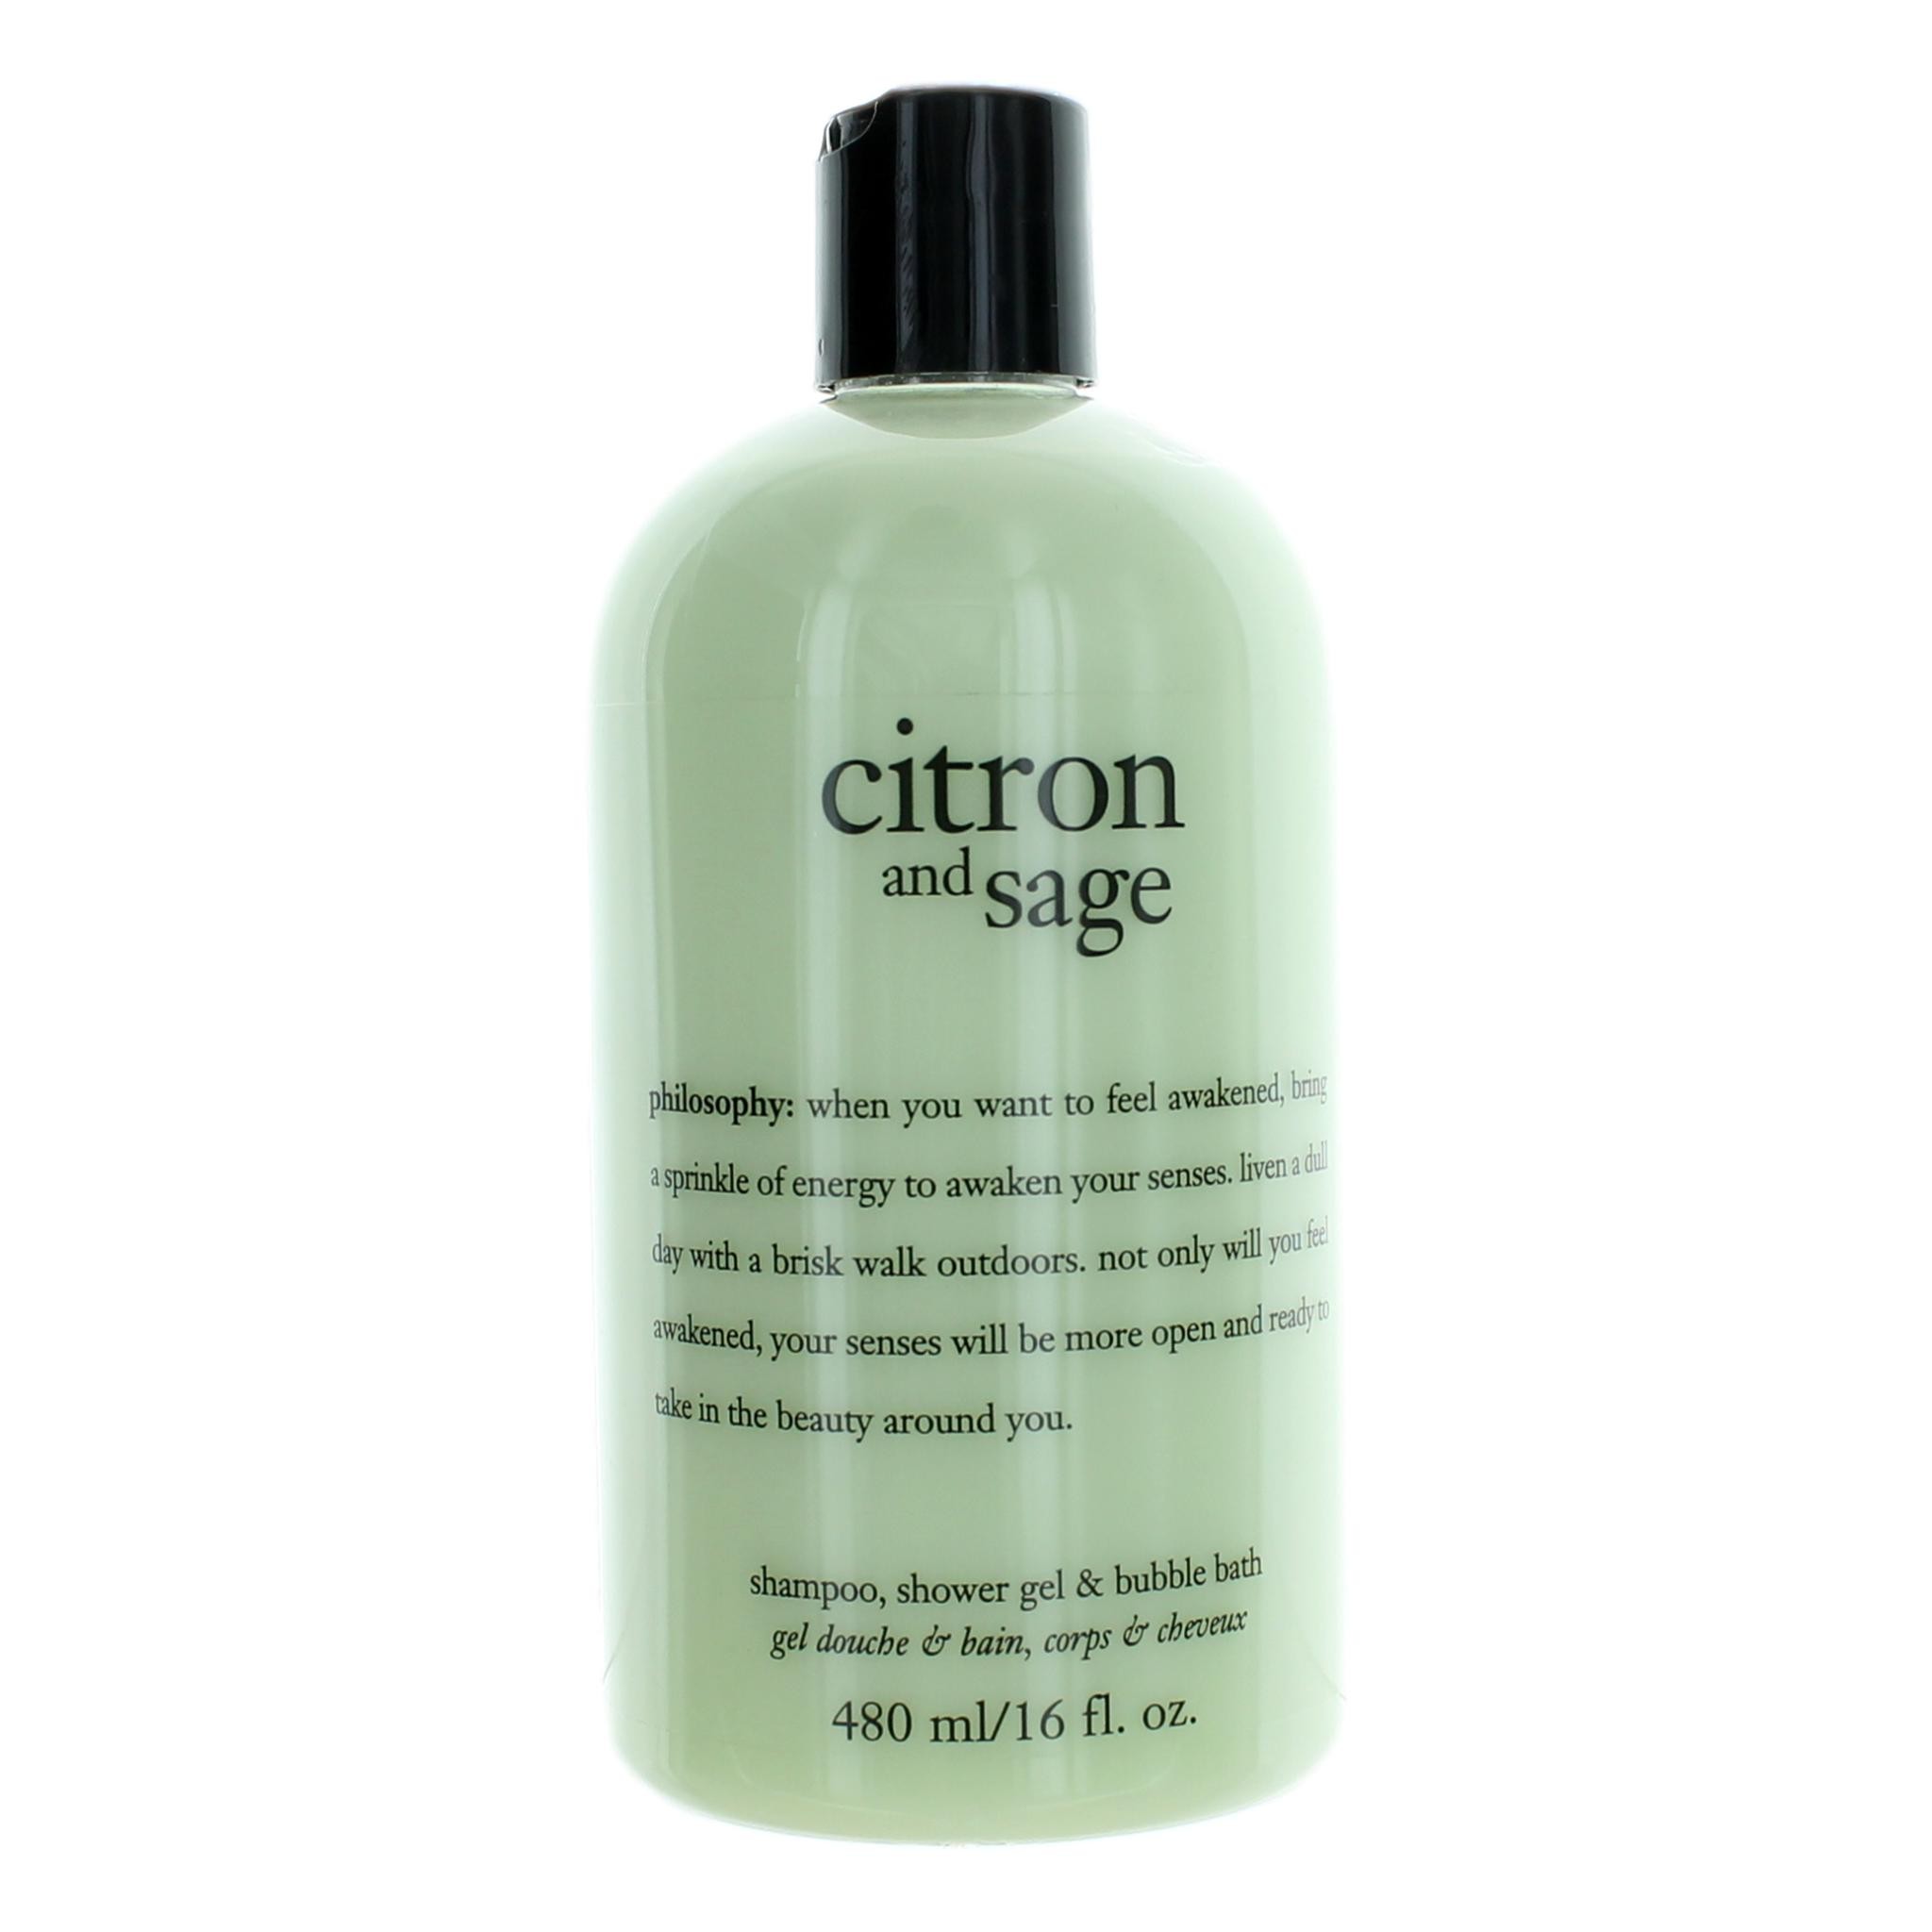 Citron and Sage by Philosophy 16 oz Shampoo